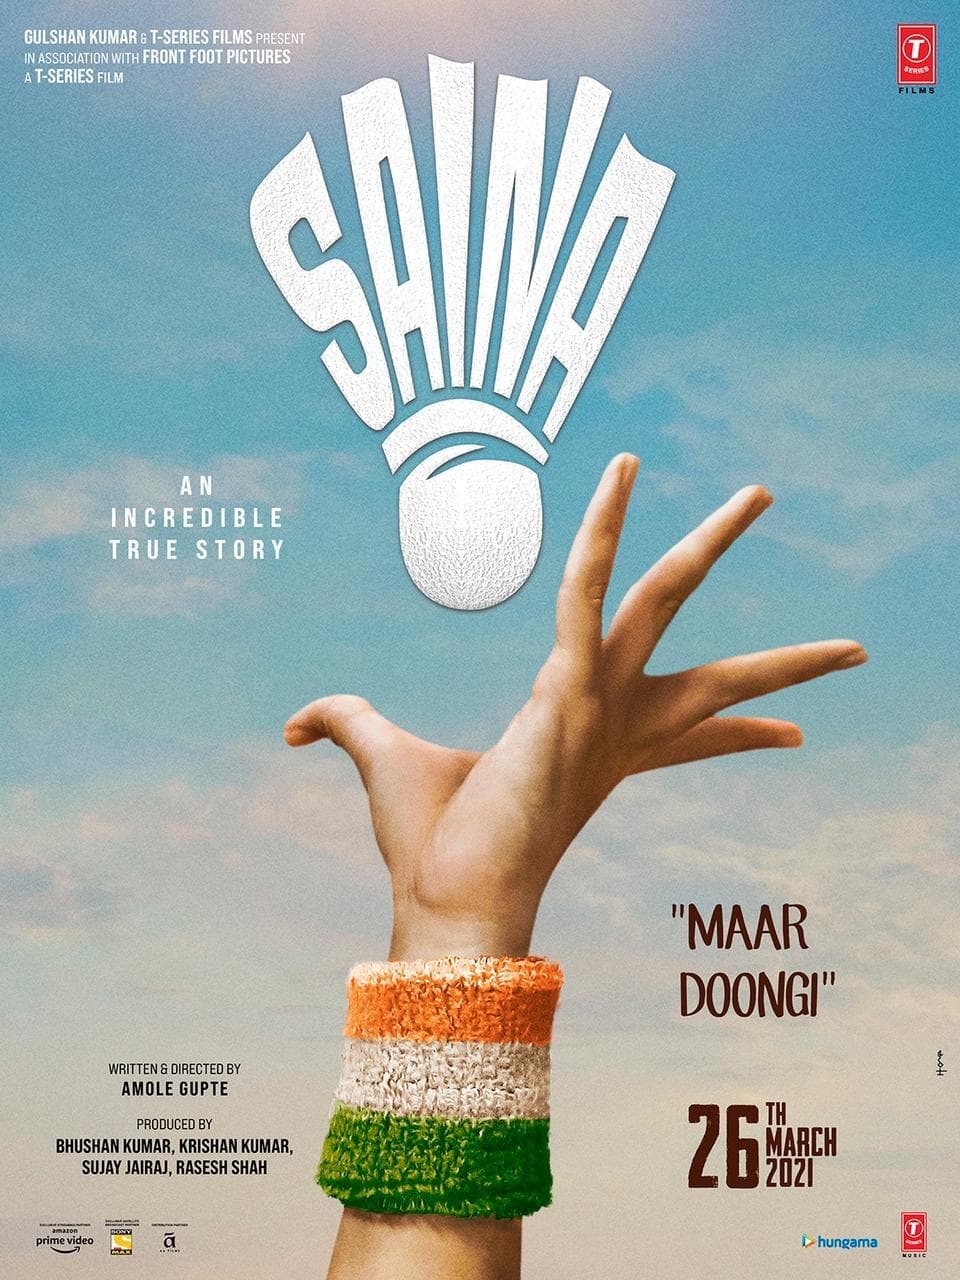 Poster for the movie "Saina"